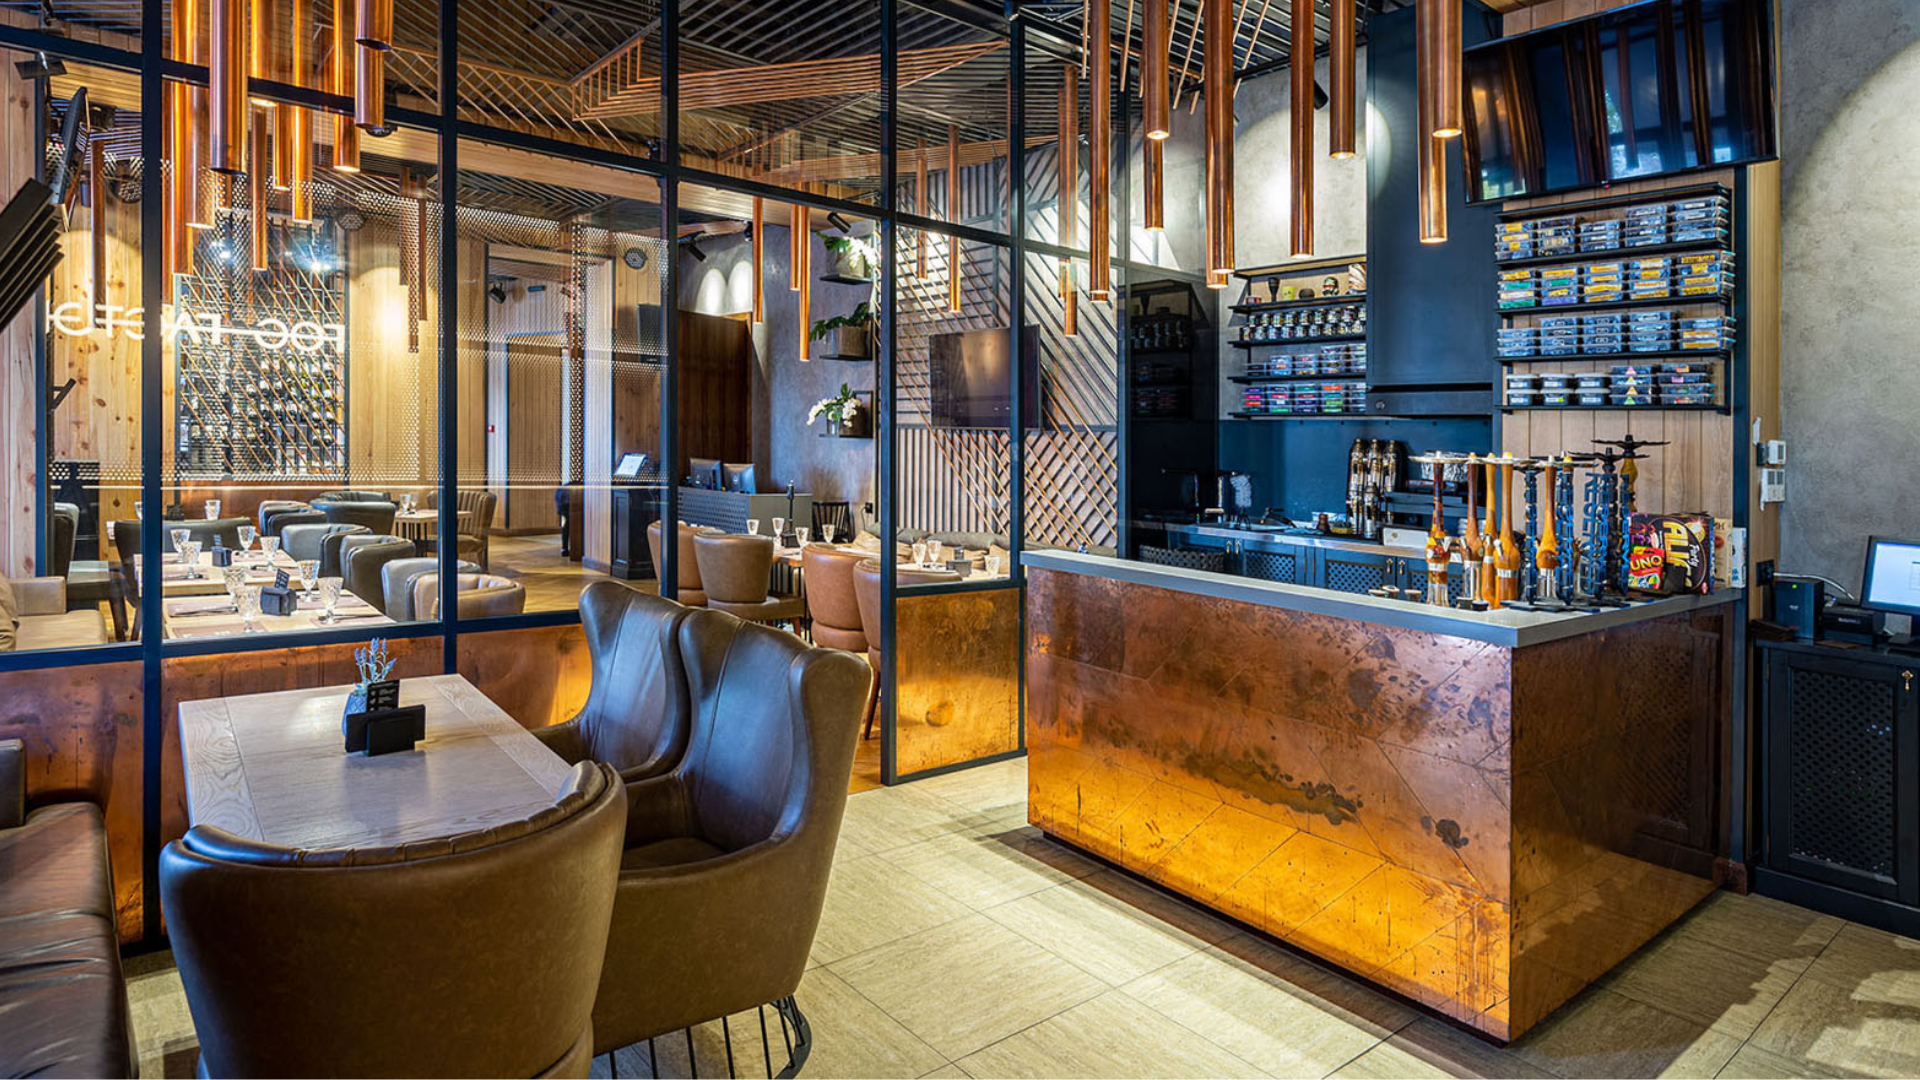 The interior of the Fog Factory restaurant became the silver winner of the IADA 2023